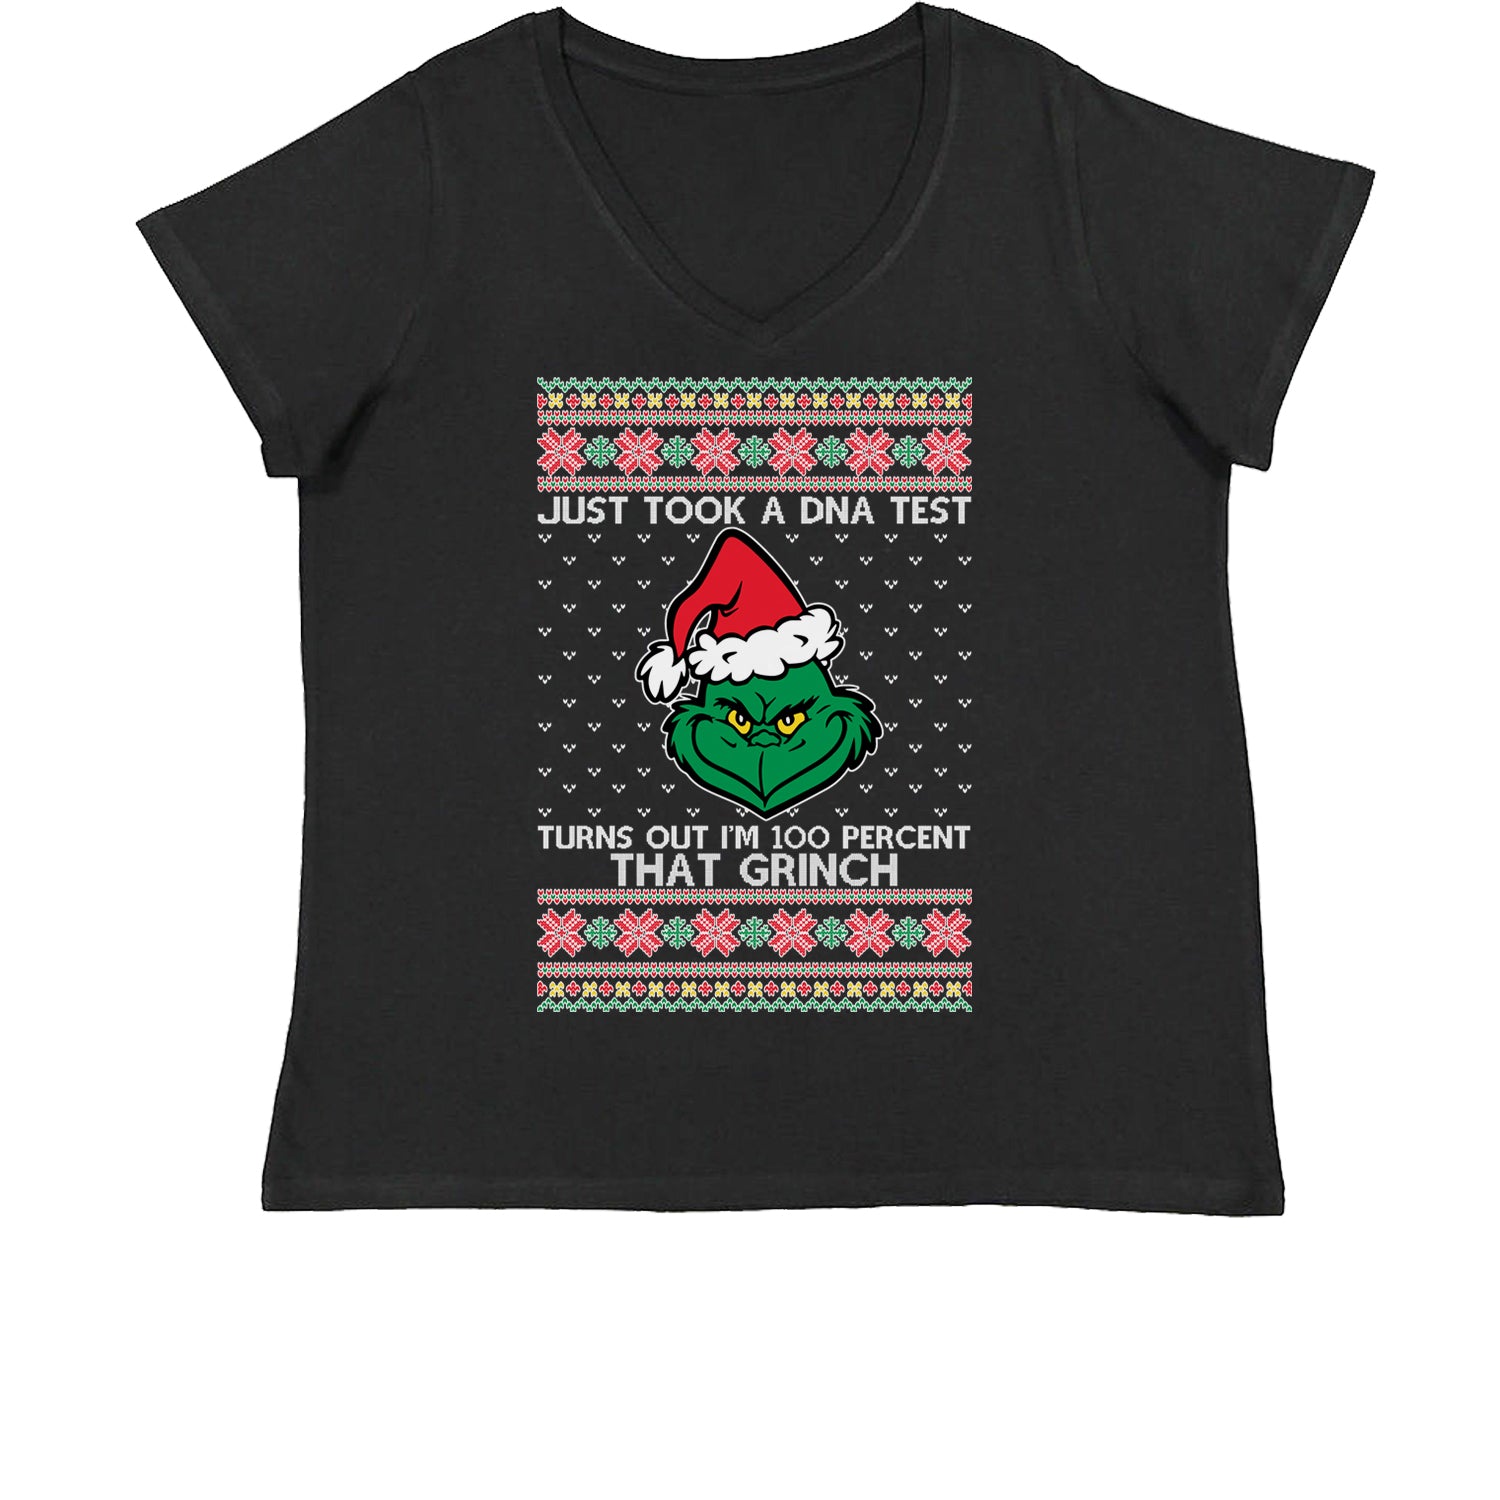 One Hundred Percent That Grinch Womens Plus Size V-Neck T-shirt christmas, grinch, sweater, sweatshirt, ugly, xmas by Expression Tees